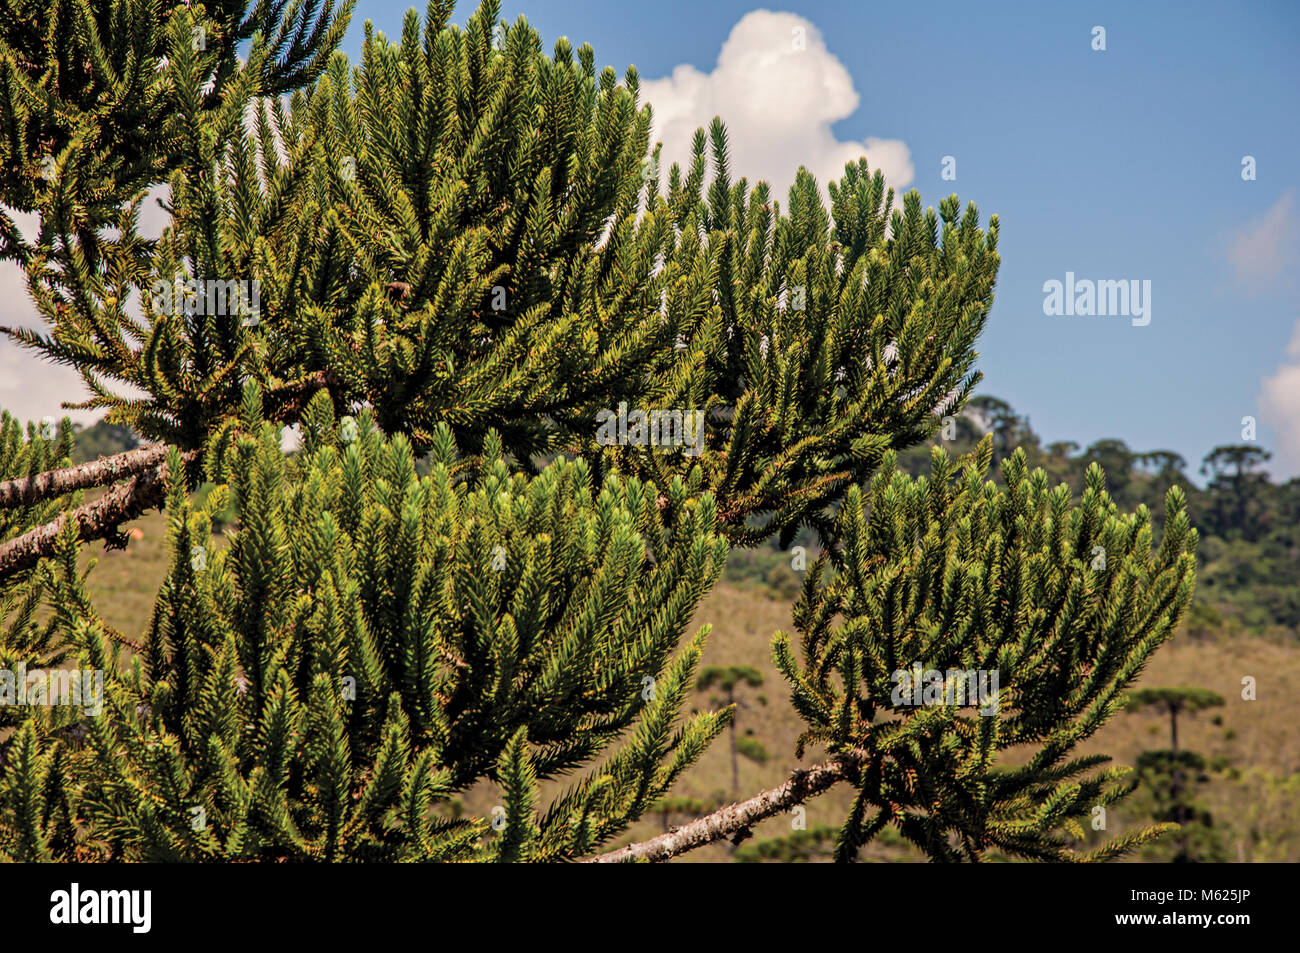 Close-up of pine branches in Horto Florestal, near Campos de Jordao, a town famous for its mountain and hiking tourism. Brazil. Stock Photo